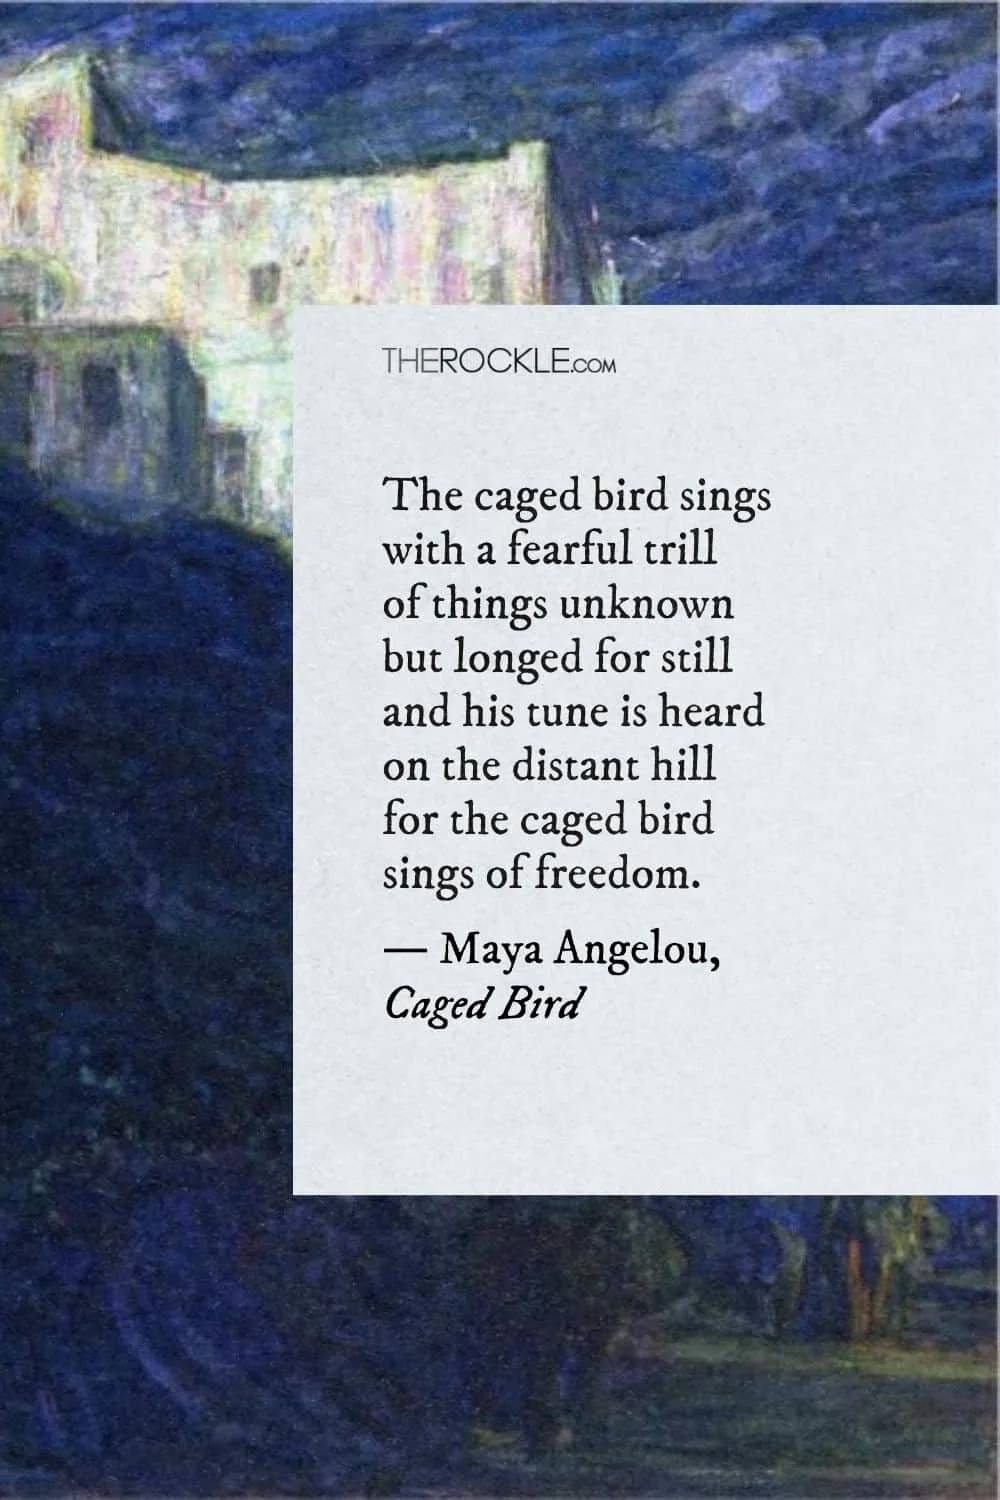 Maya Angelou's quote from Caged Bird